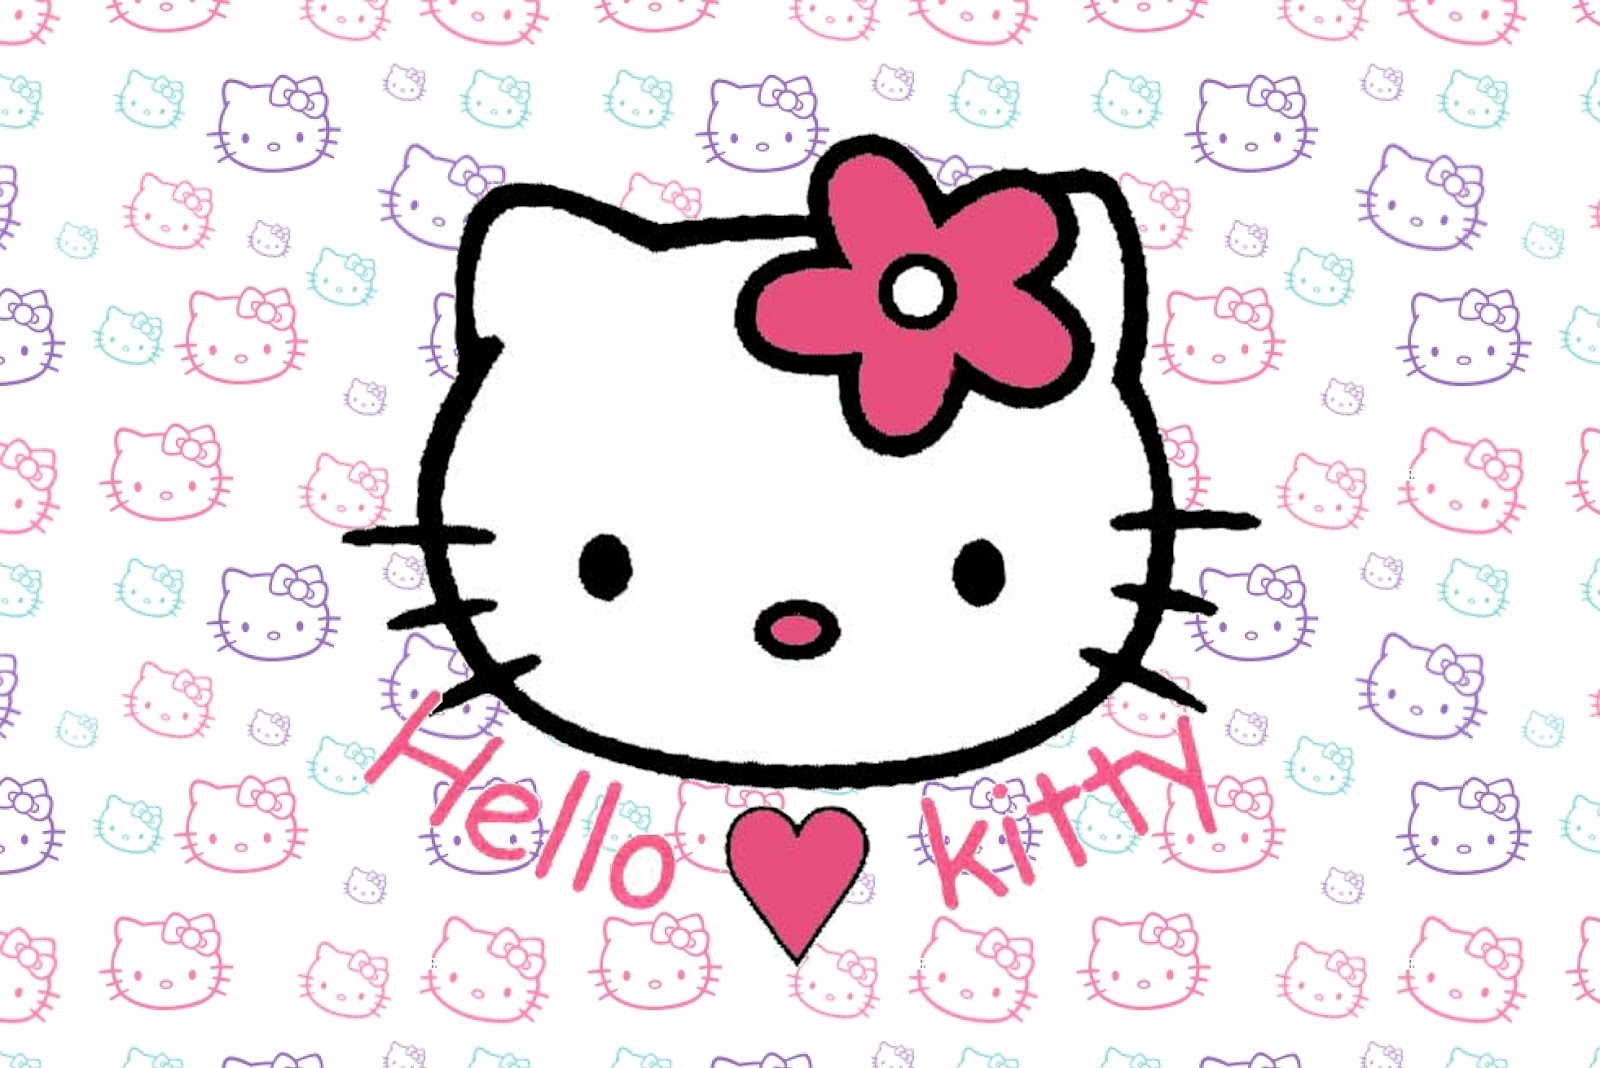 hello-kitty-party-free-printable-invitations-oh-my-fiesta-in-english